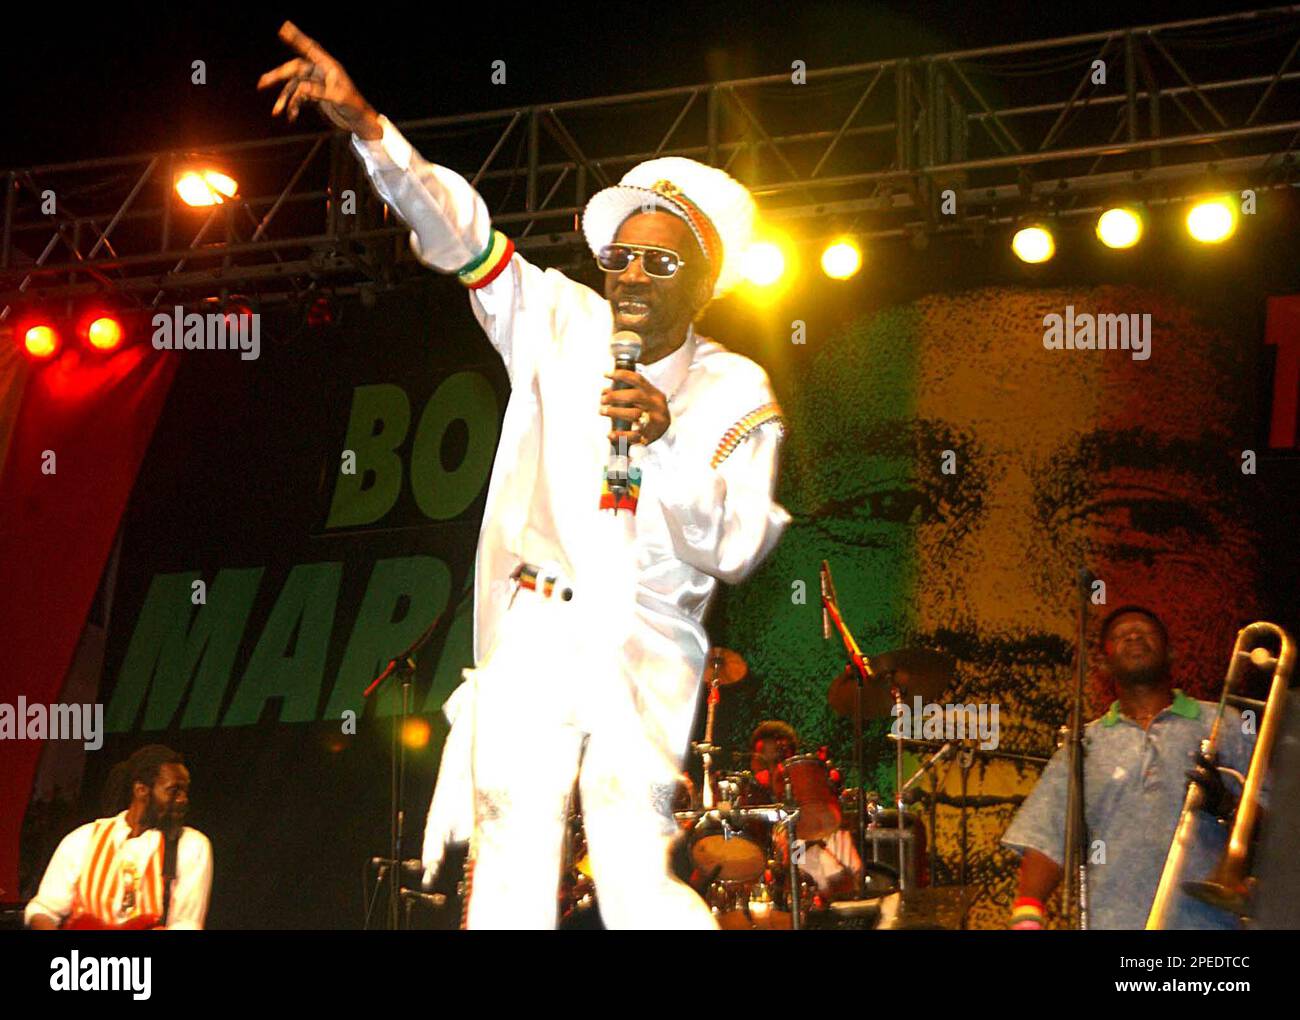 Bunny Wailer sings the songs of Bob Marley at the One Love concert to celebrate Marley's 60th birthday, Sunday, Feb. 6, 2005 in Kingston, Jamaica. Bunny Wailer is the only surviving member of Bob Marley and the Wailers which included, Bob, Bunny and Peter Tosh. (AP PHOTO/Collin Reid ) **EFE OUT** Stock Photo